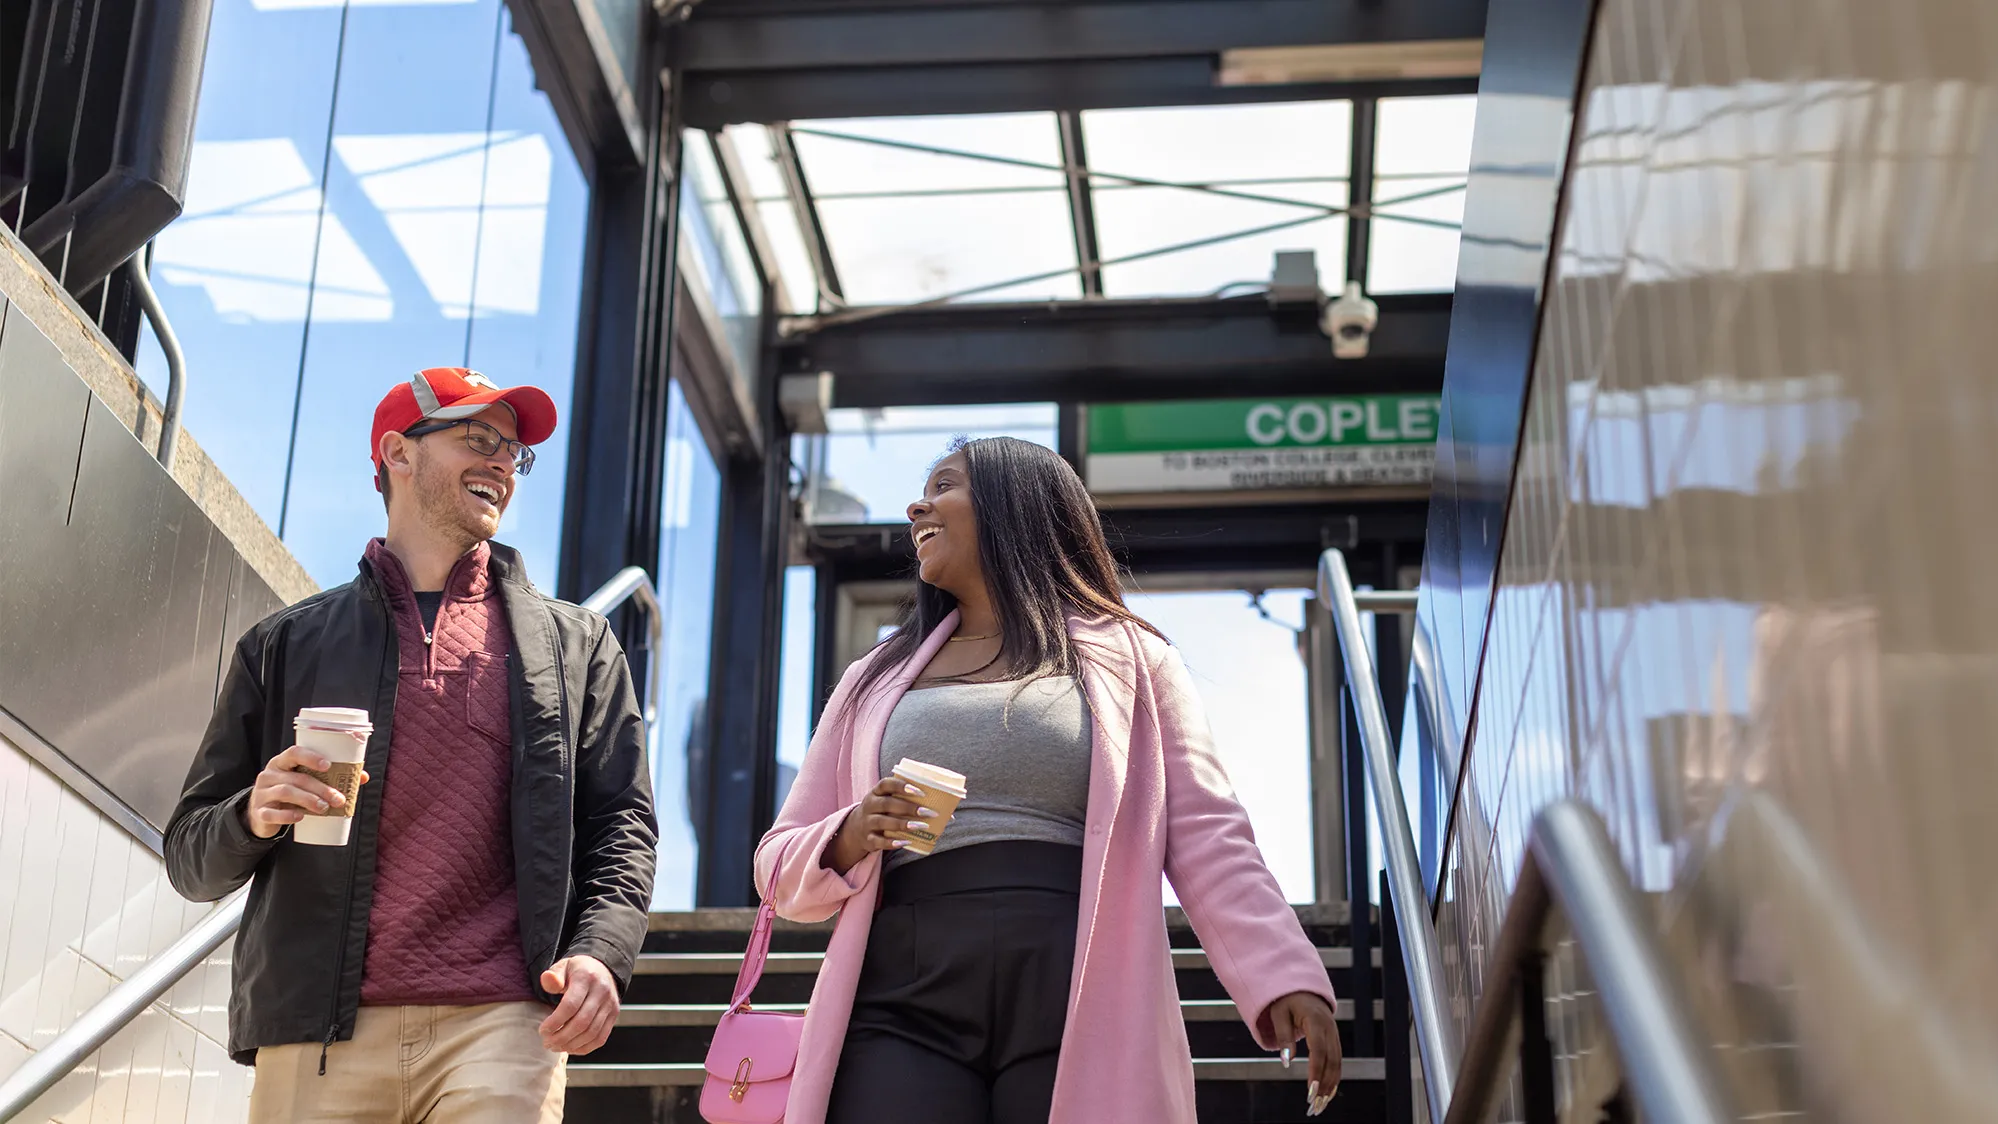 Josh Javor, a white man with glasses and a baseball cap, and Dominque McClean, a Black woman with long hair in a dress coat, smile at each other as they walk down stairs into a subway entrance.